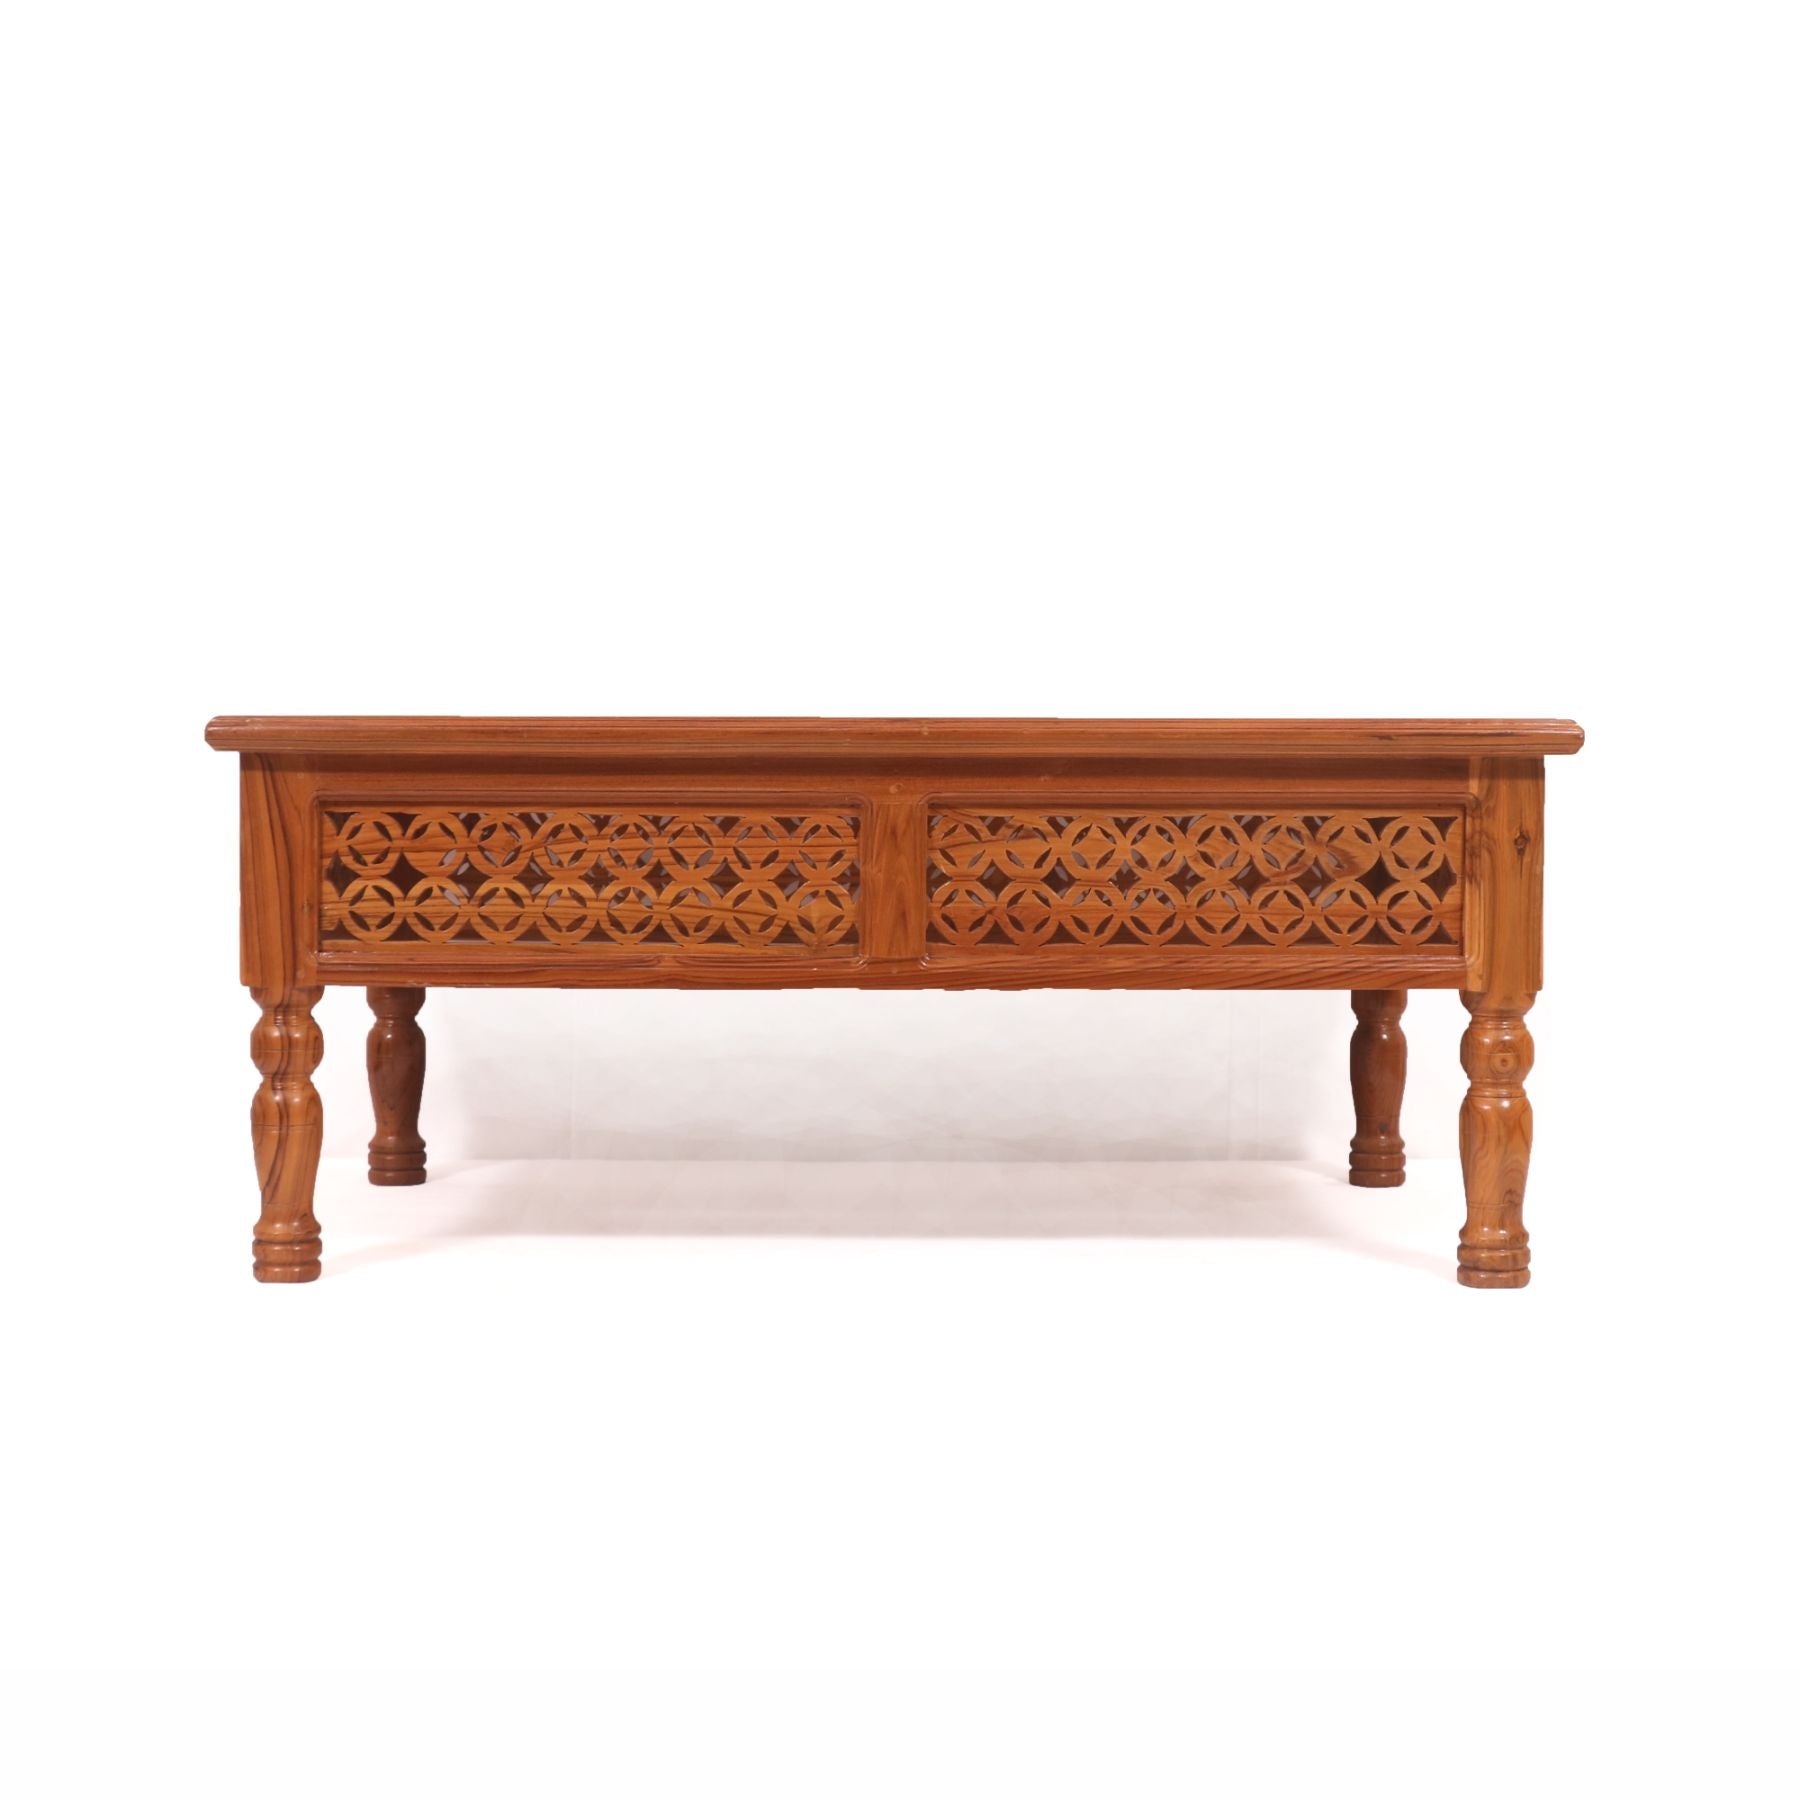 Charming Carved Border Coffee Table Coffee Table